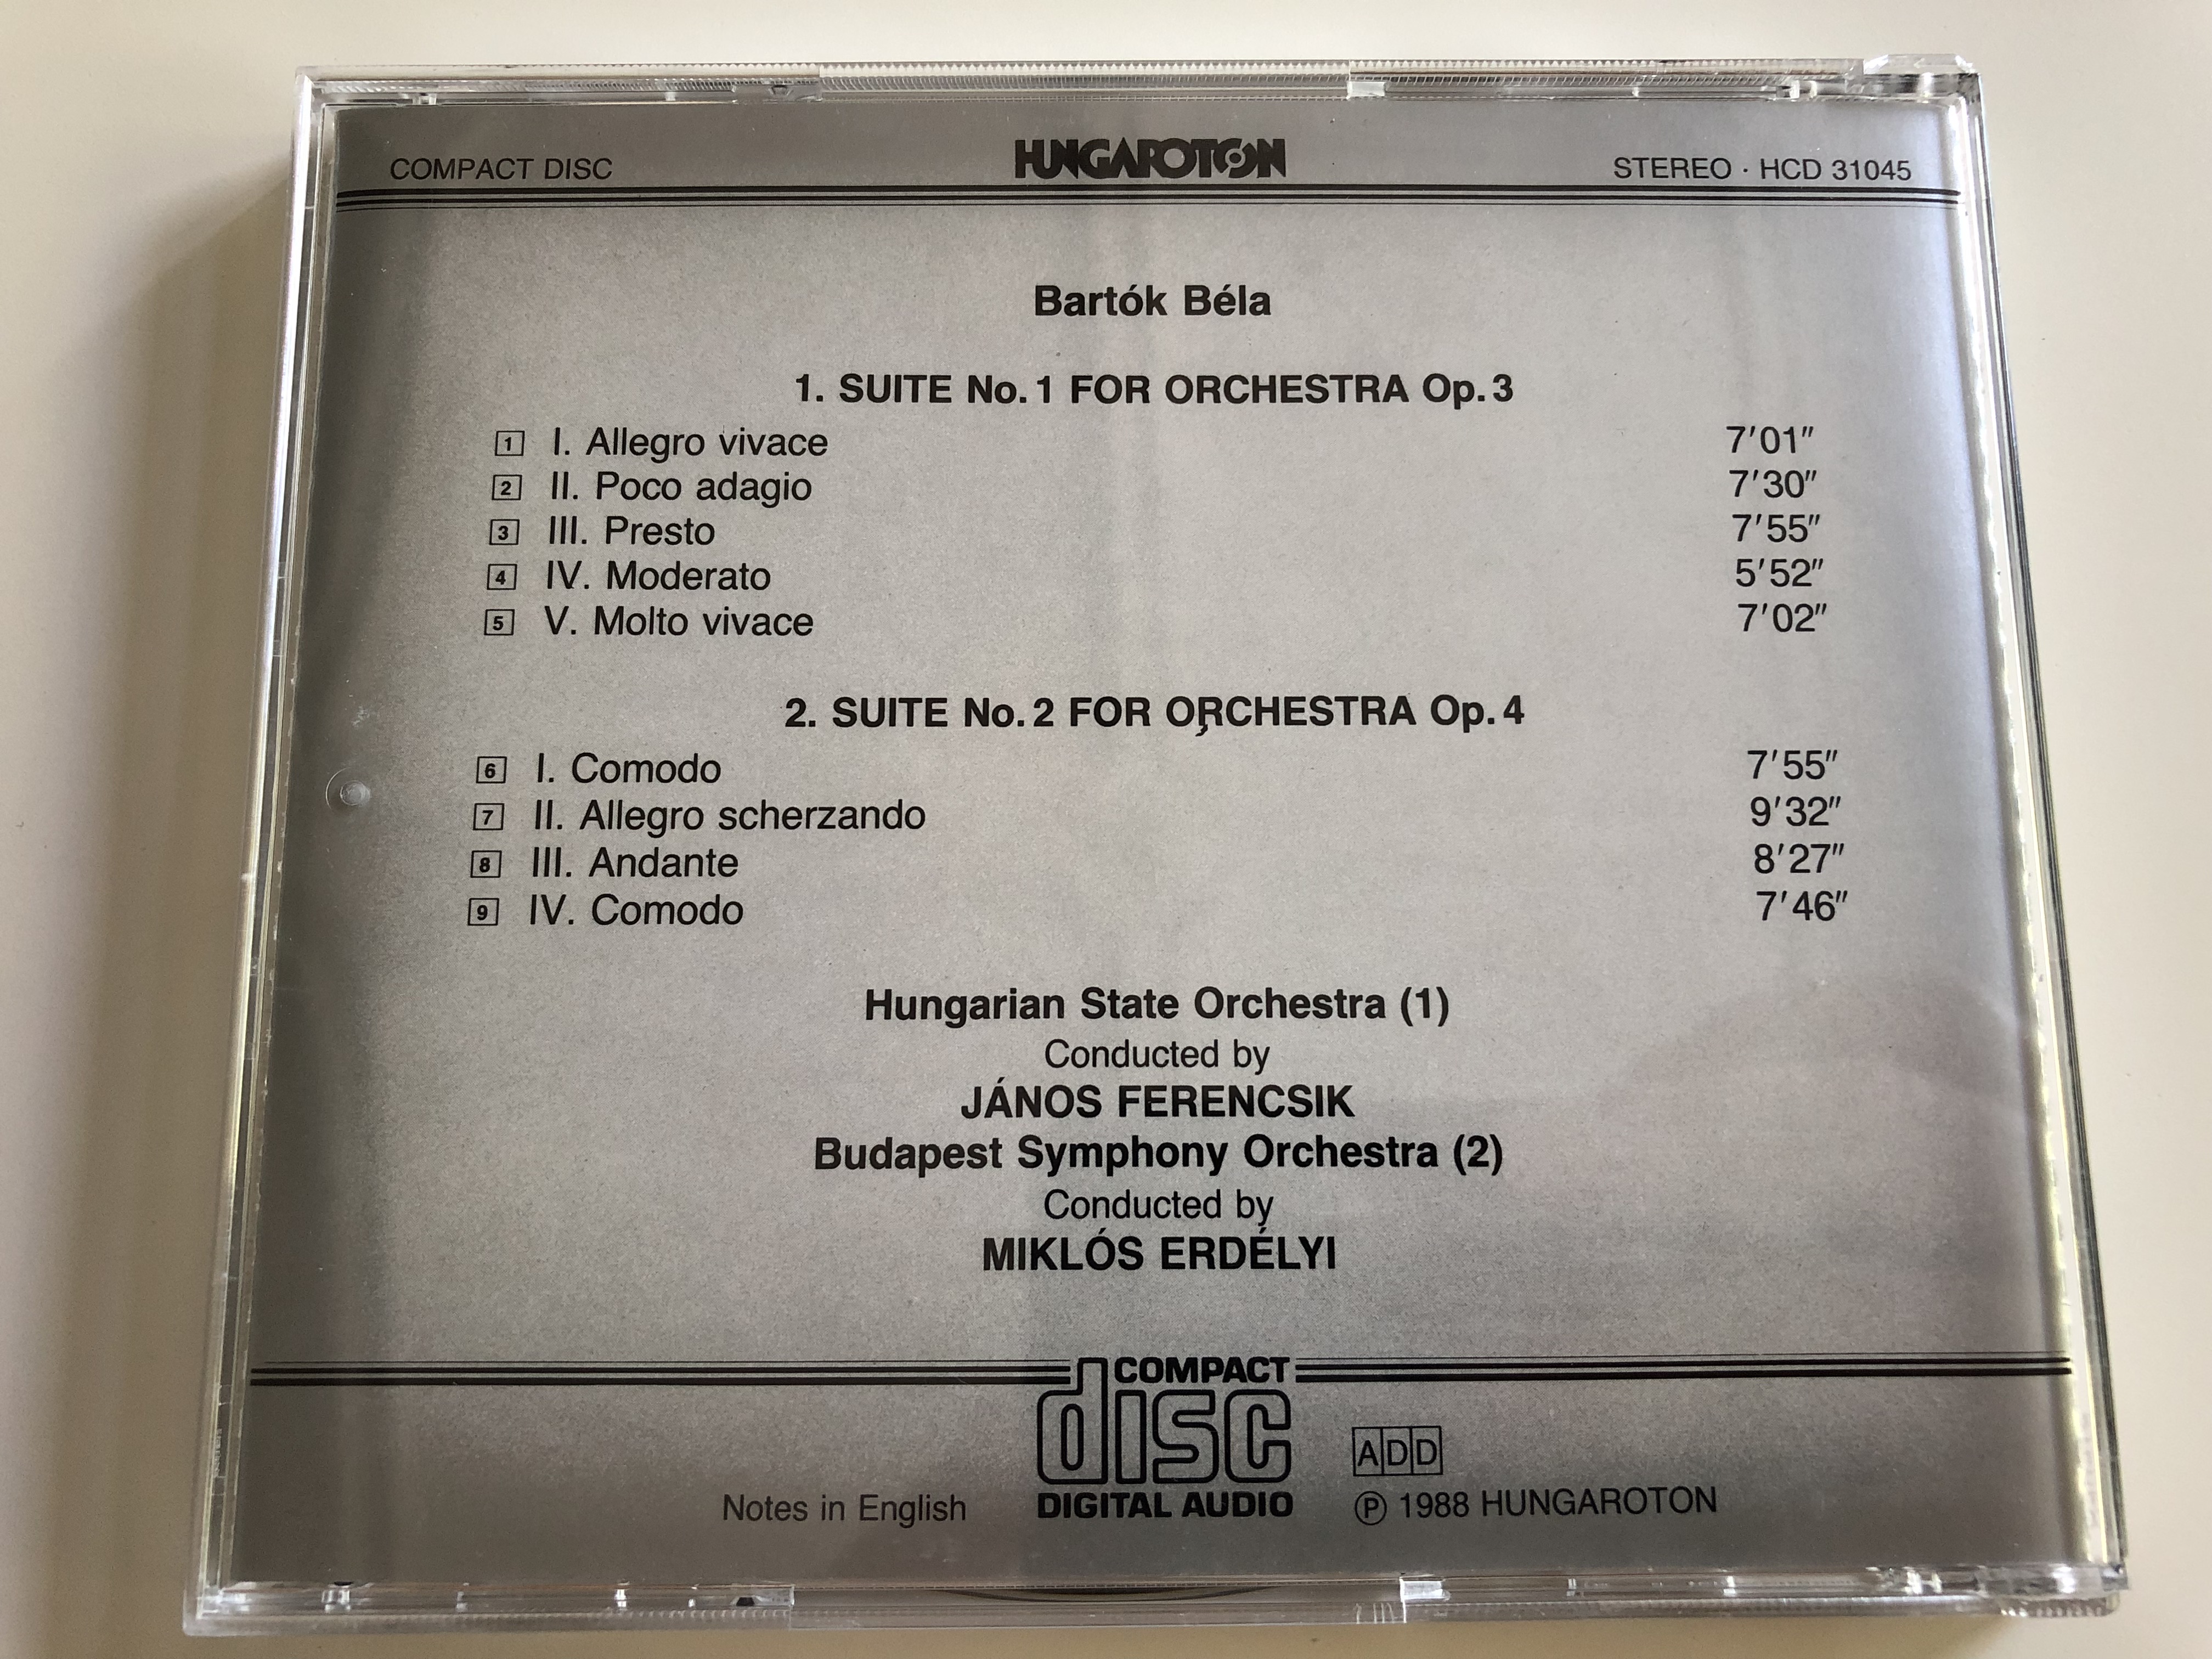 bart-k-b-la-orchestral-suites-nos.-1-2-hungarian-state-orchestra-conducted-by-j-nos-ferencsik-budapest-symphony-orchestra-conducted-by-mikl-s-erd-lyi-hcd-31045-audio-cd-1988-8-.jpg